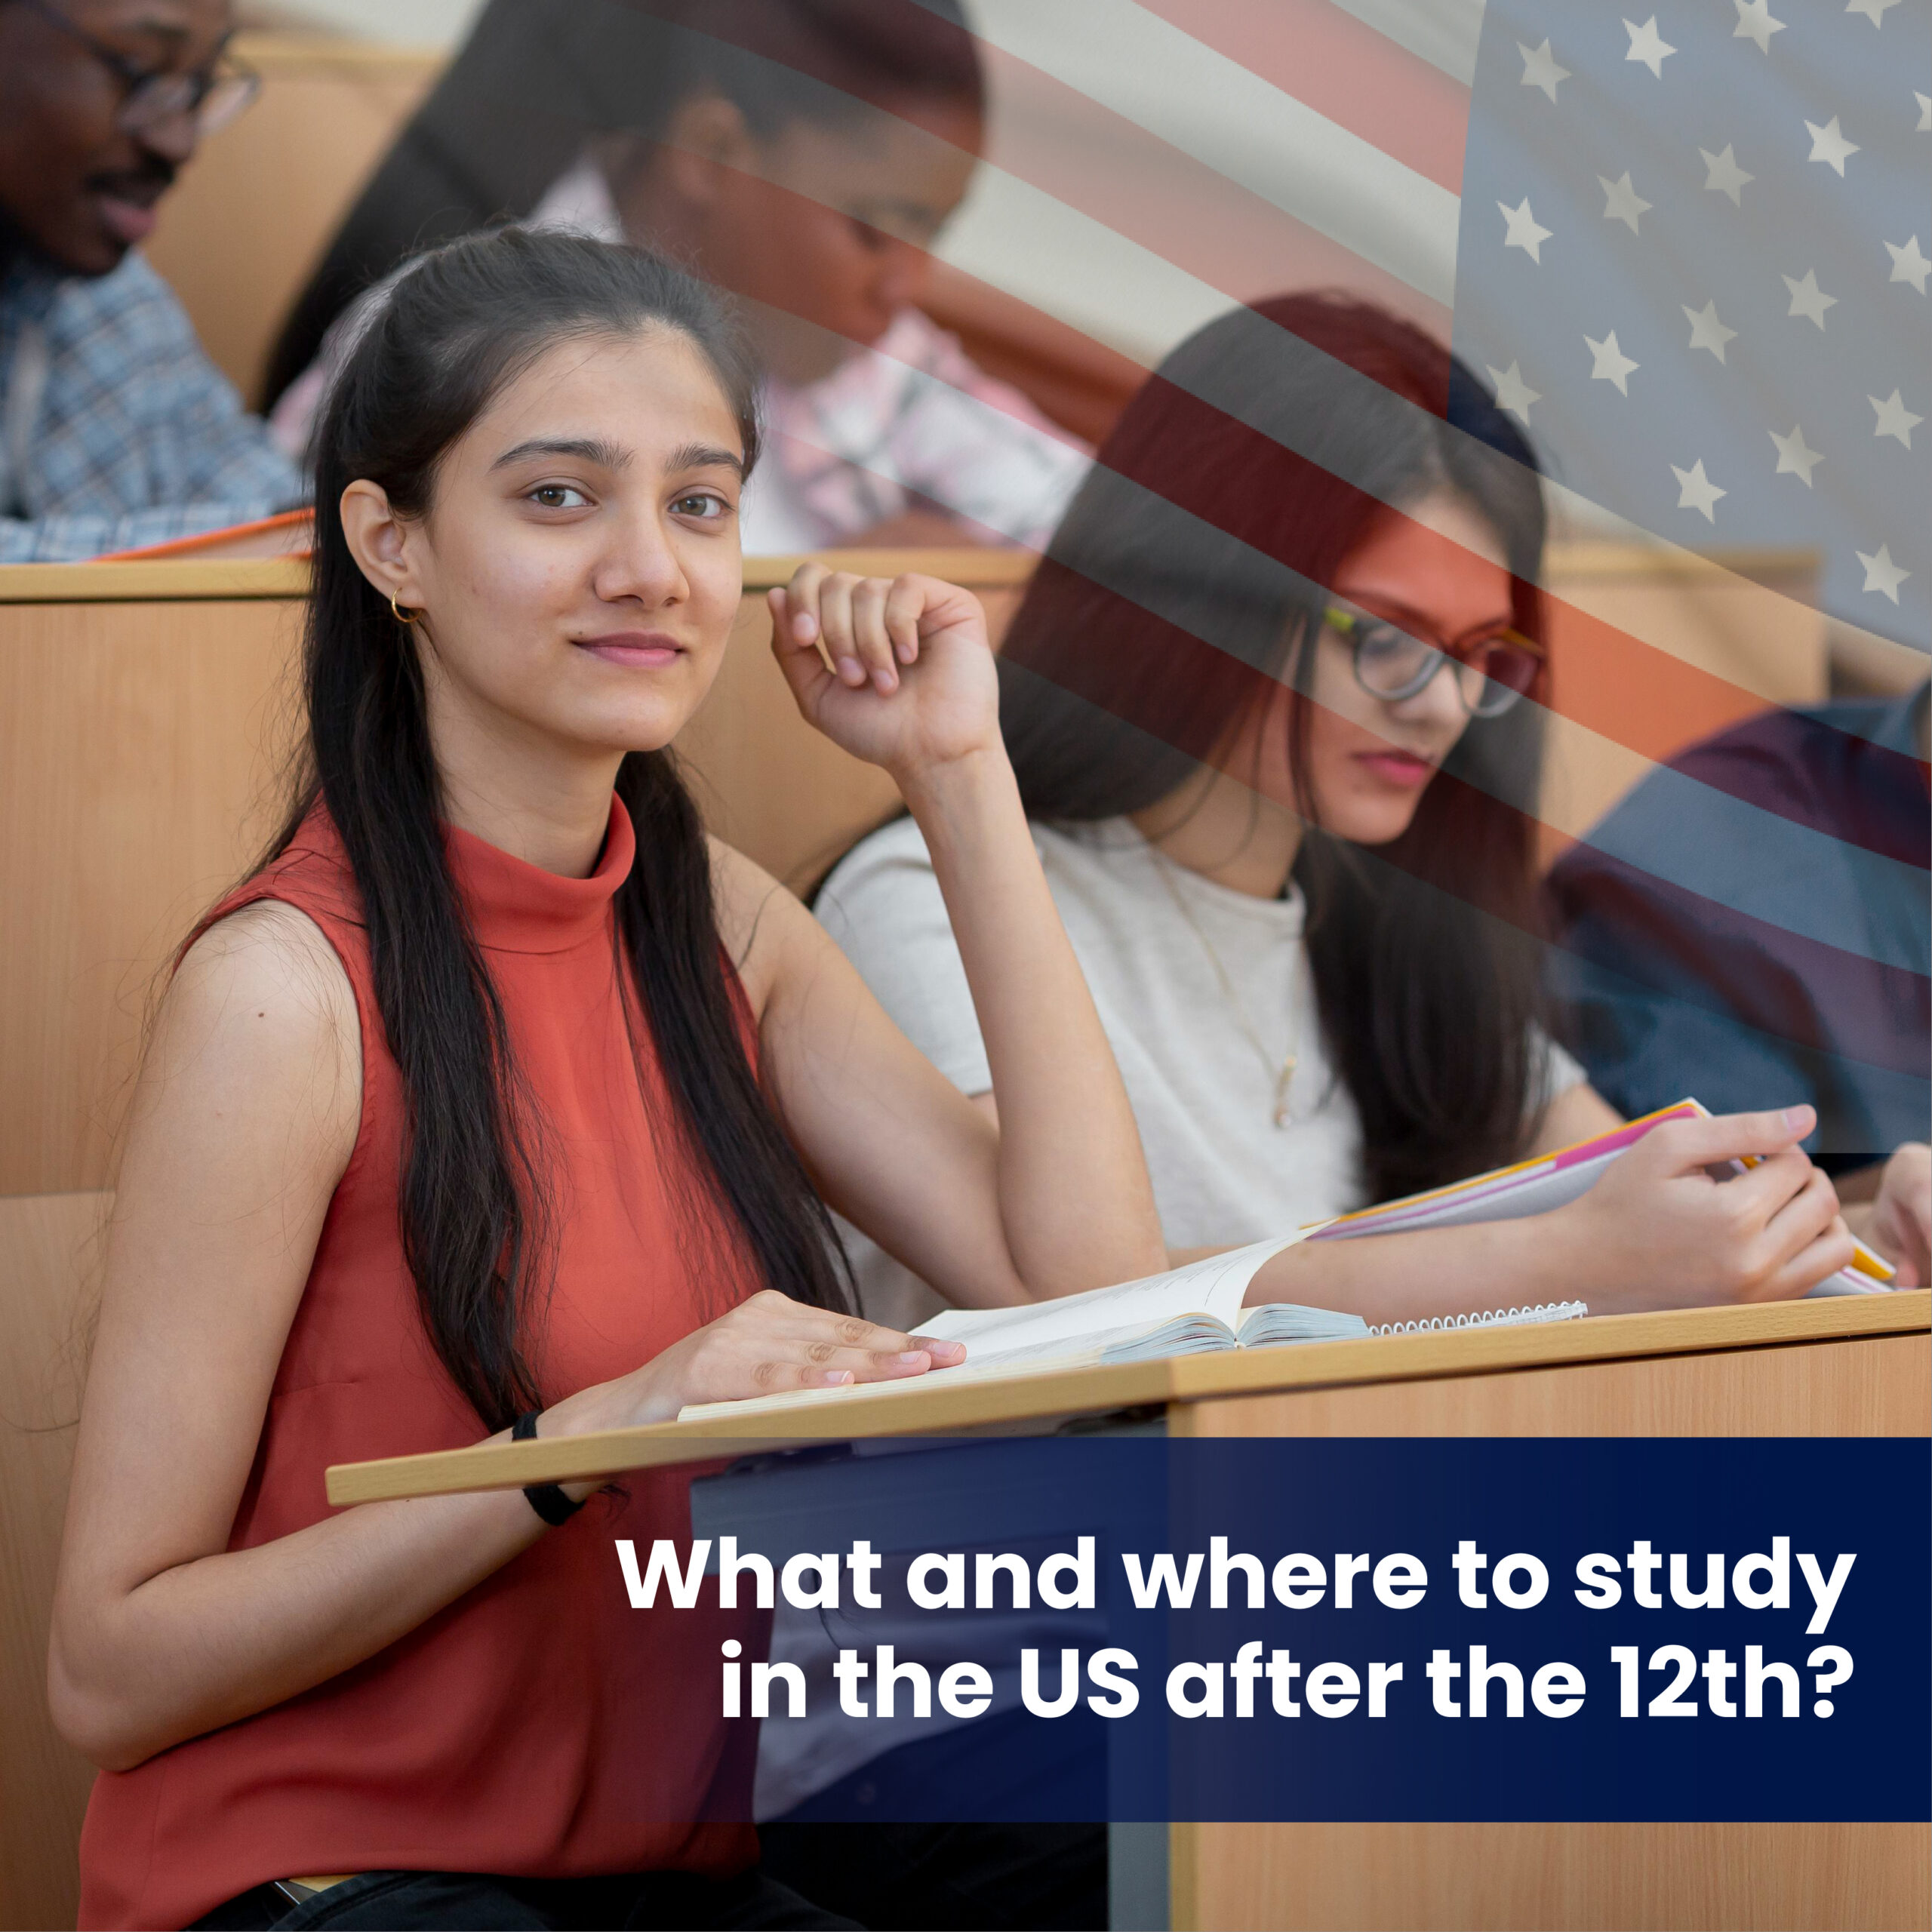 What And Where To Study In The US After 12th?